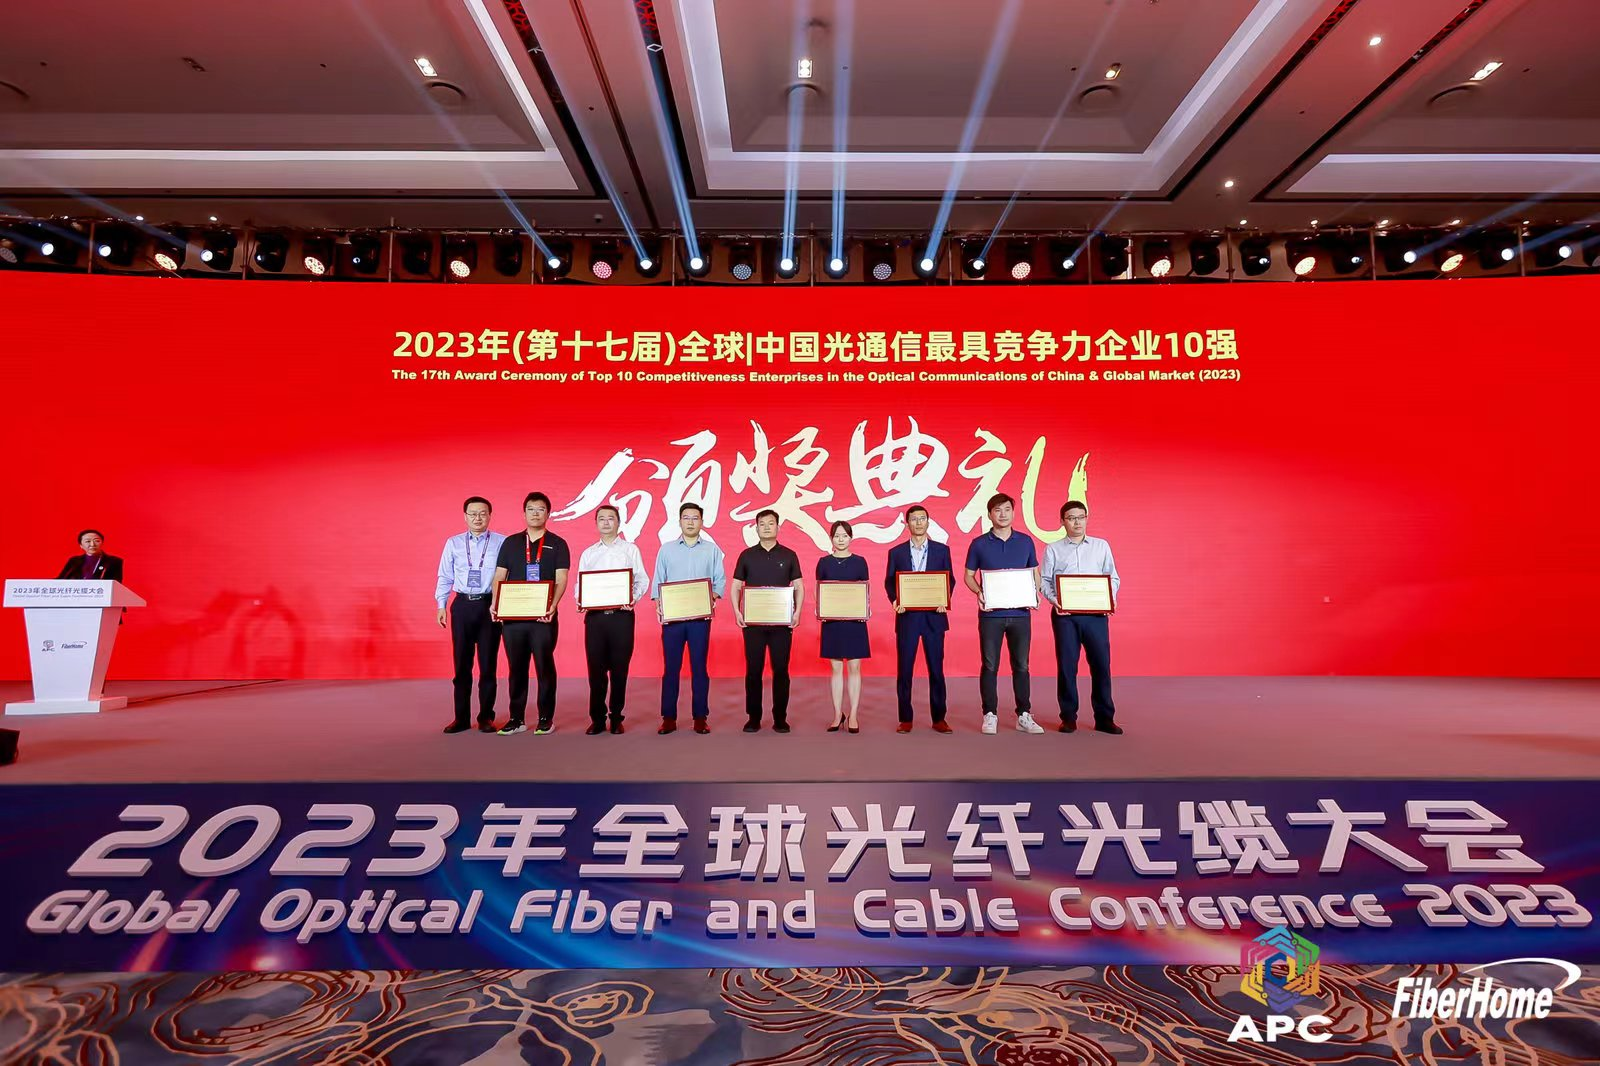 Sunstar Company won the "Top 10 Most Competitive Enterprises of China Optical Devices and Auxiliary Equipment in 2023"